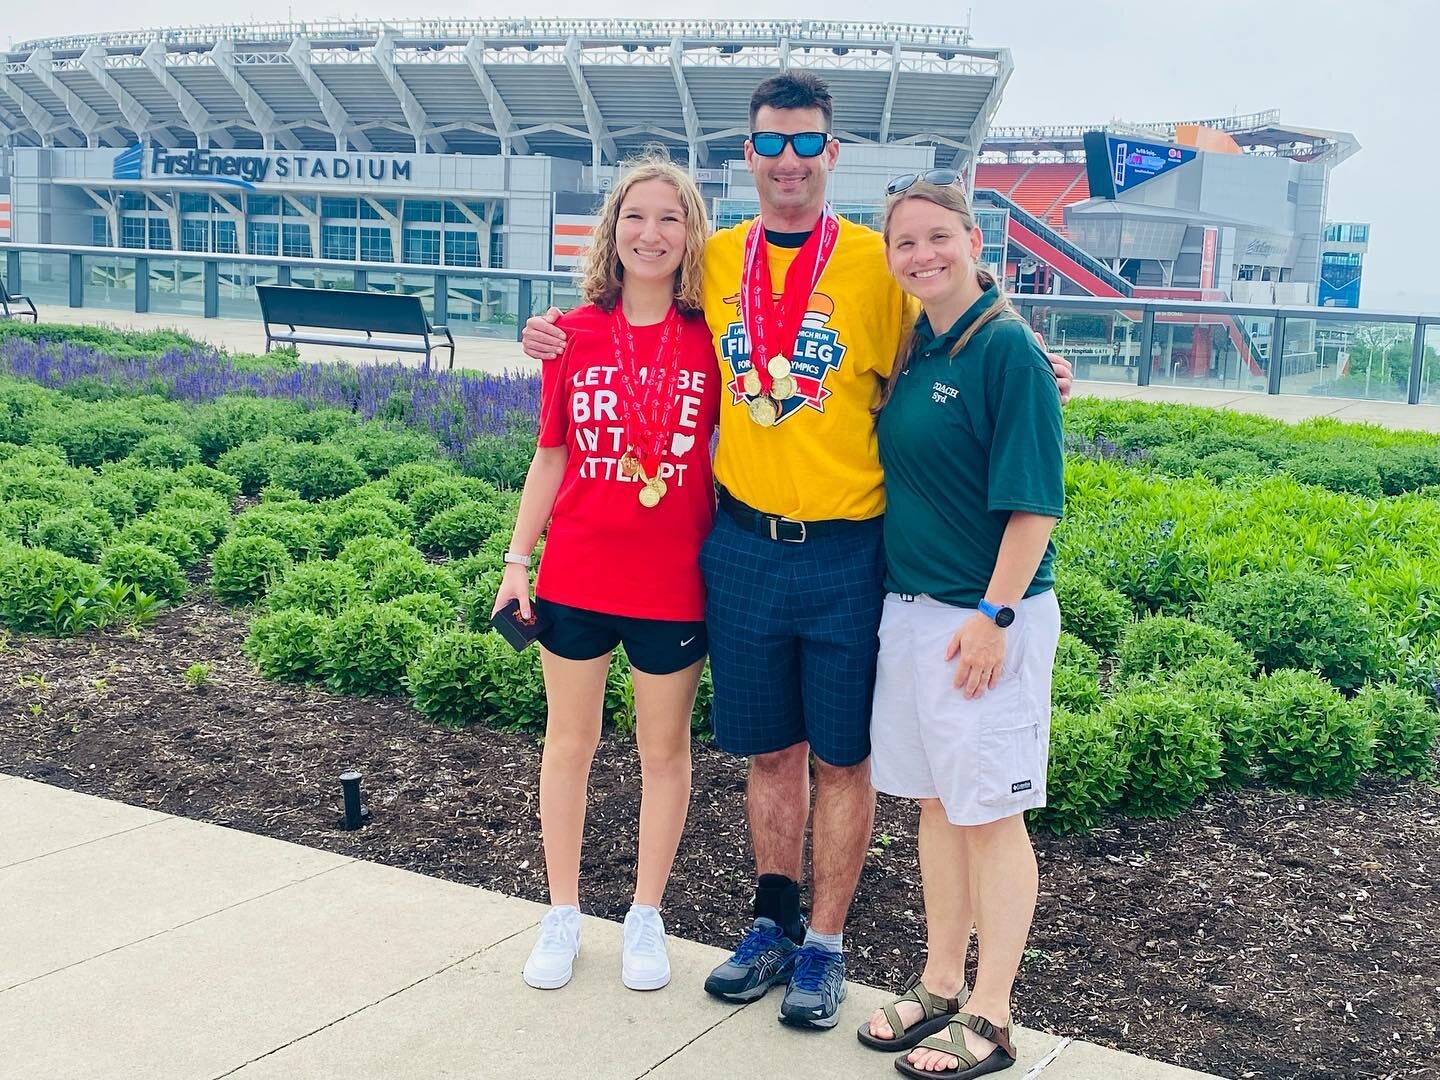 Congratulations to our Special Olympians, Seth &amp; Paige, as well as Coach Syd, who will be representing Ohio in the Special Olympics USA Games in Orlando, FL!  We are very proud of each of you!